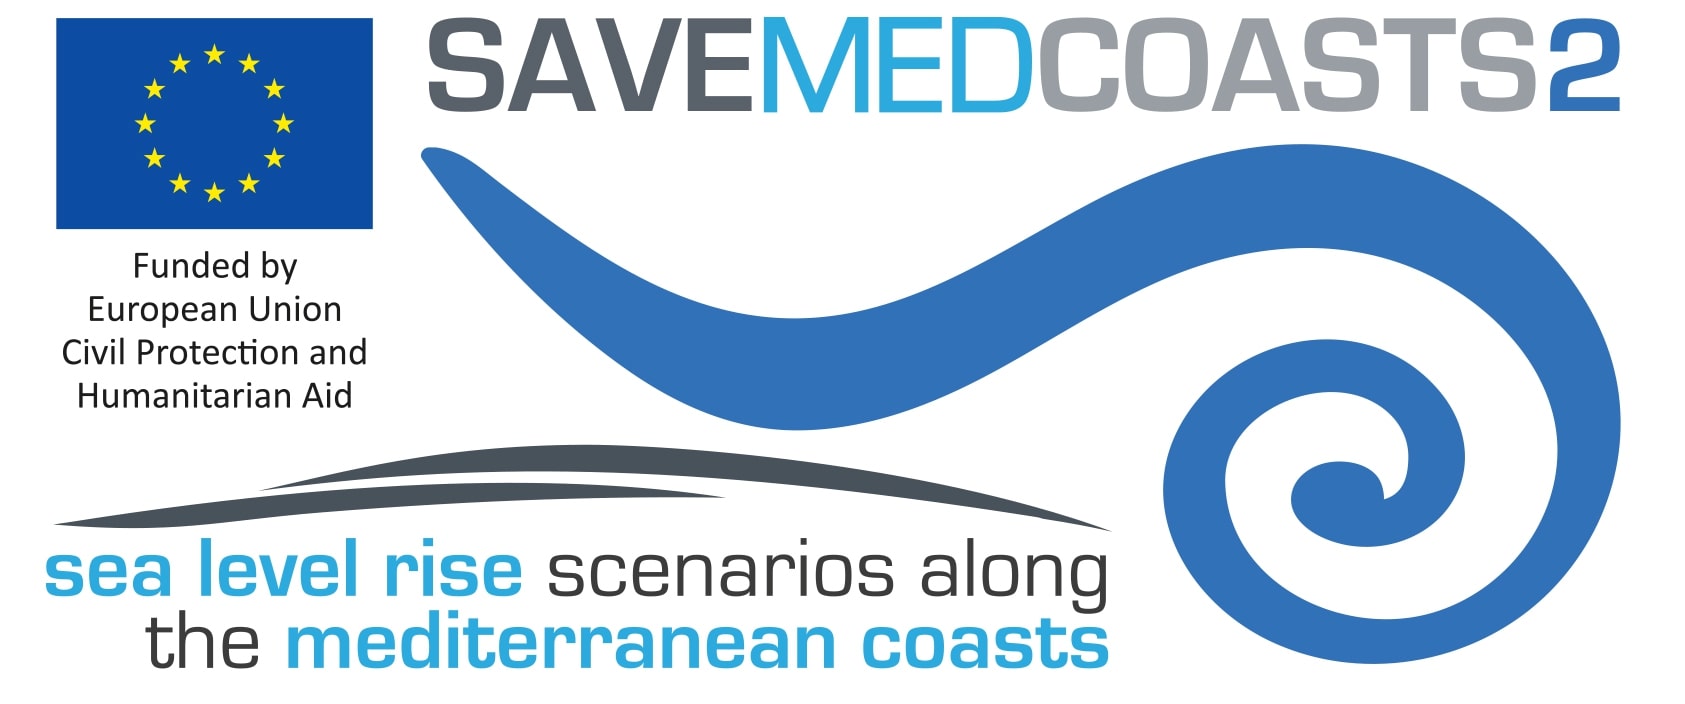 June 17,2022 - Final Conference SAVEMEDCOASTS-2 Project 